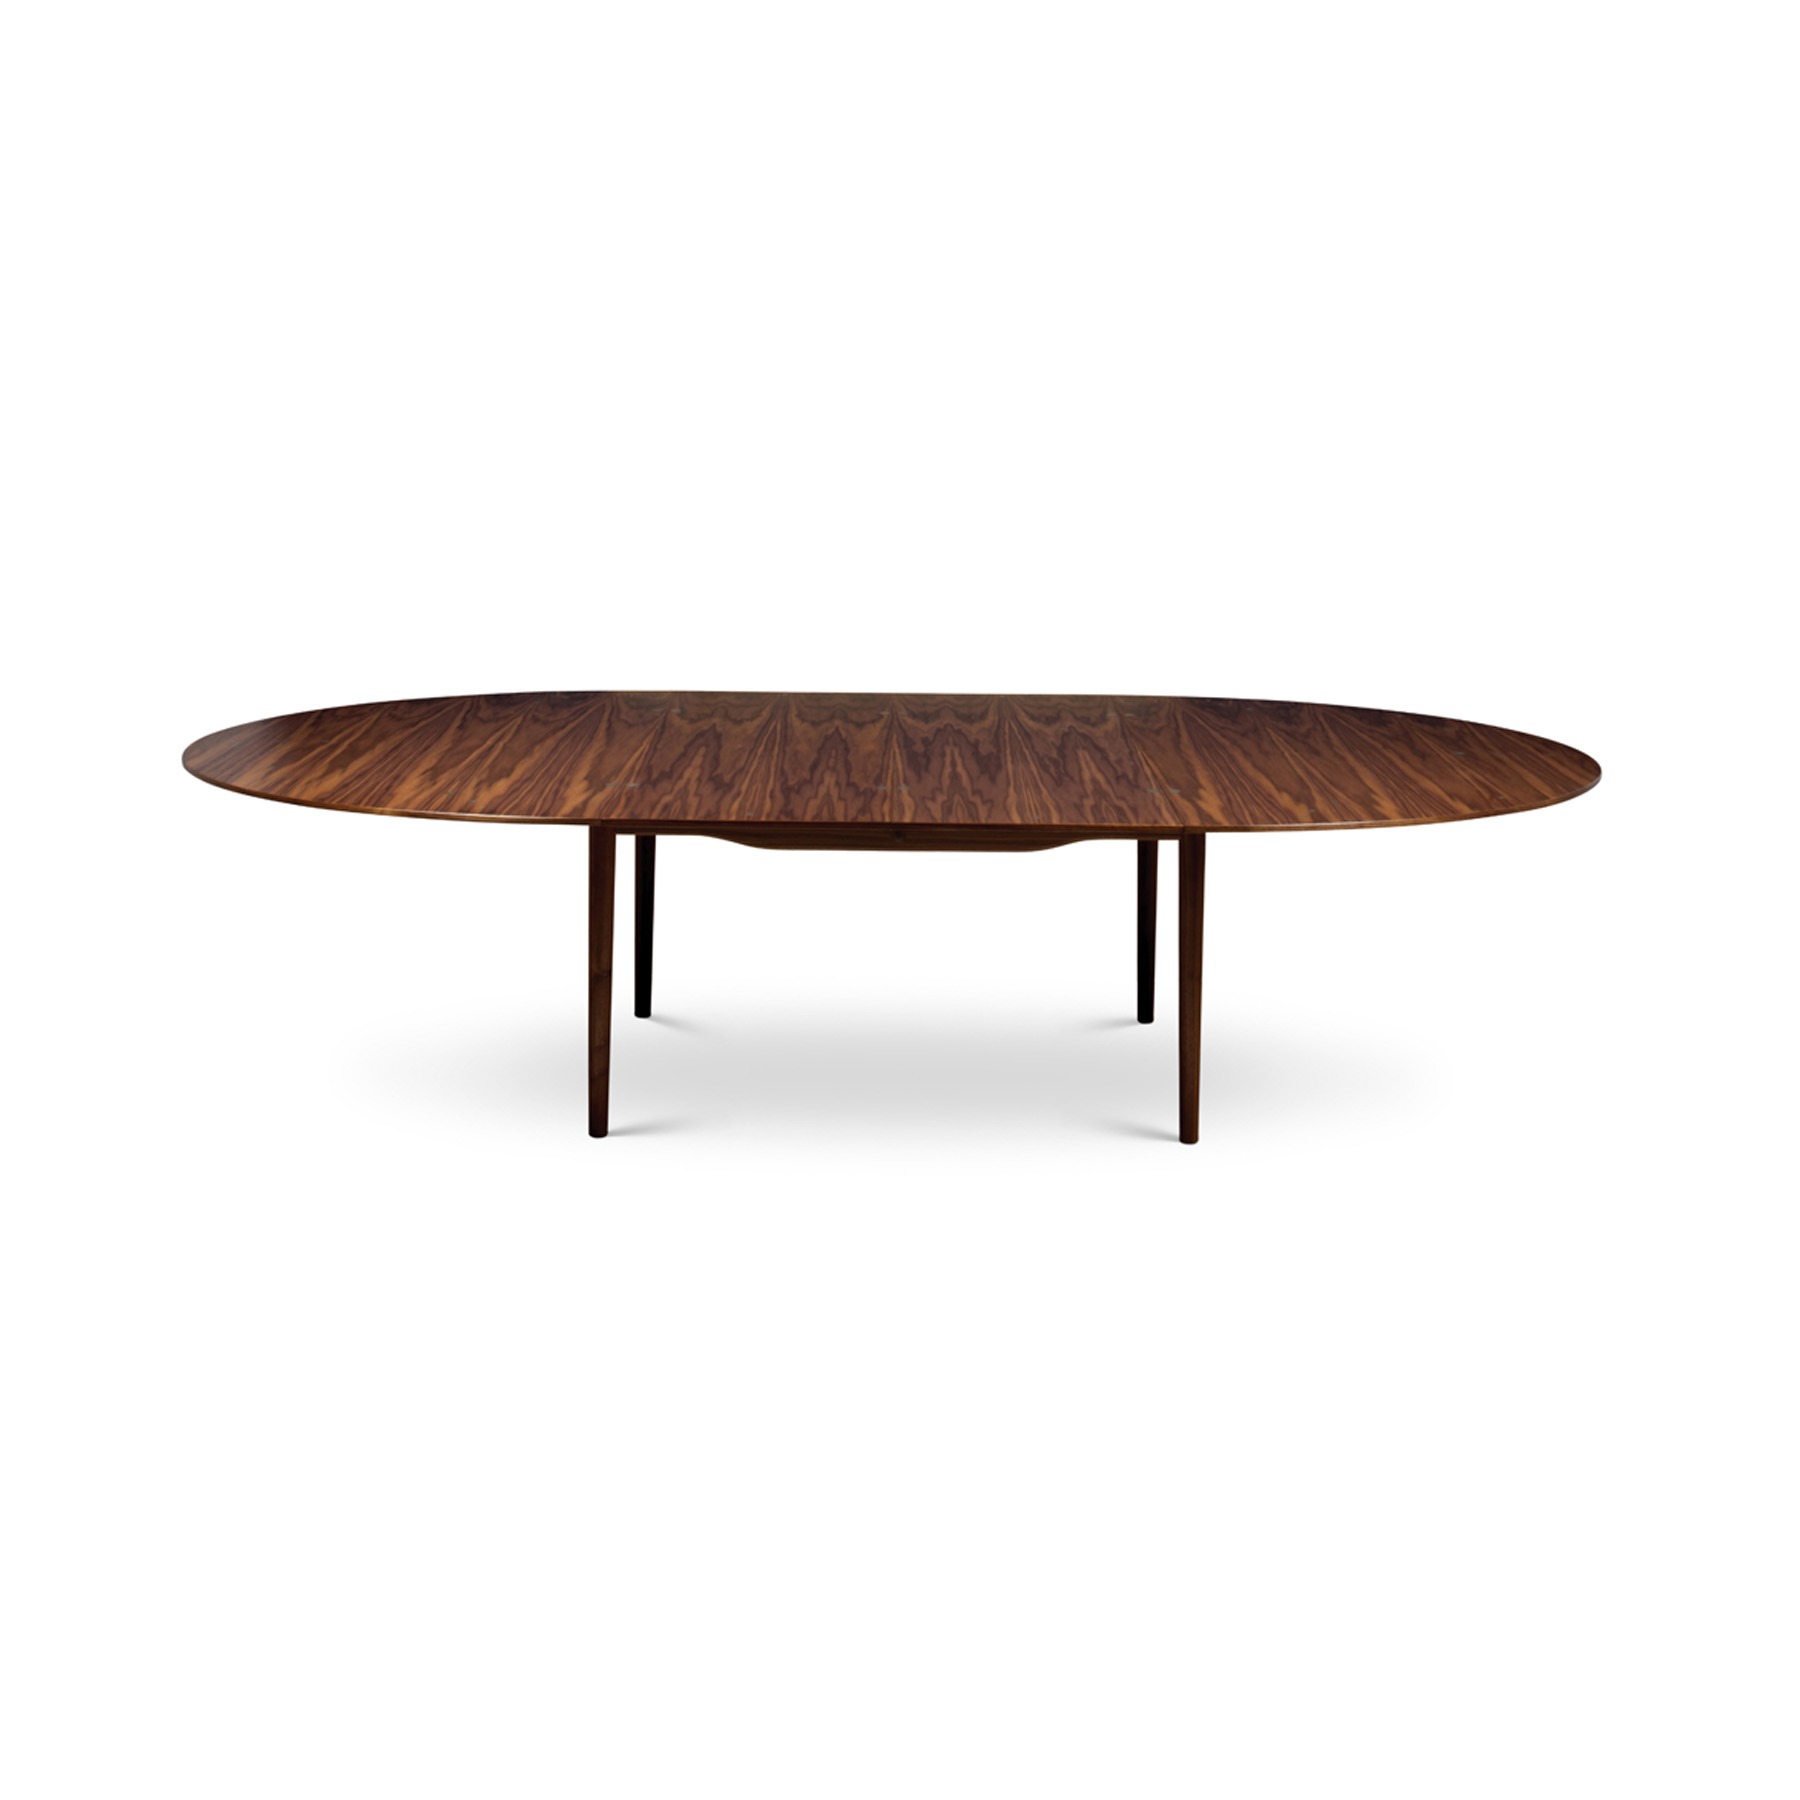 House of Finn Juhl Silver Table (without silver inlays) 하우스 오브 핀율 실버 테이블(은 장식 없음) 180/290*120*72.5